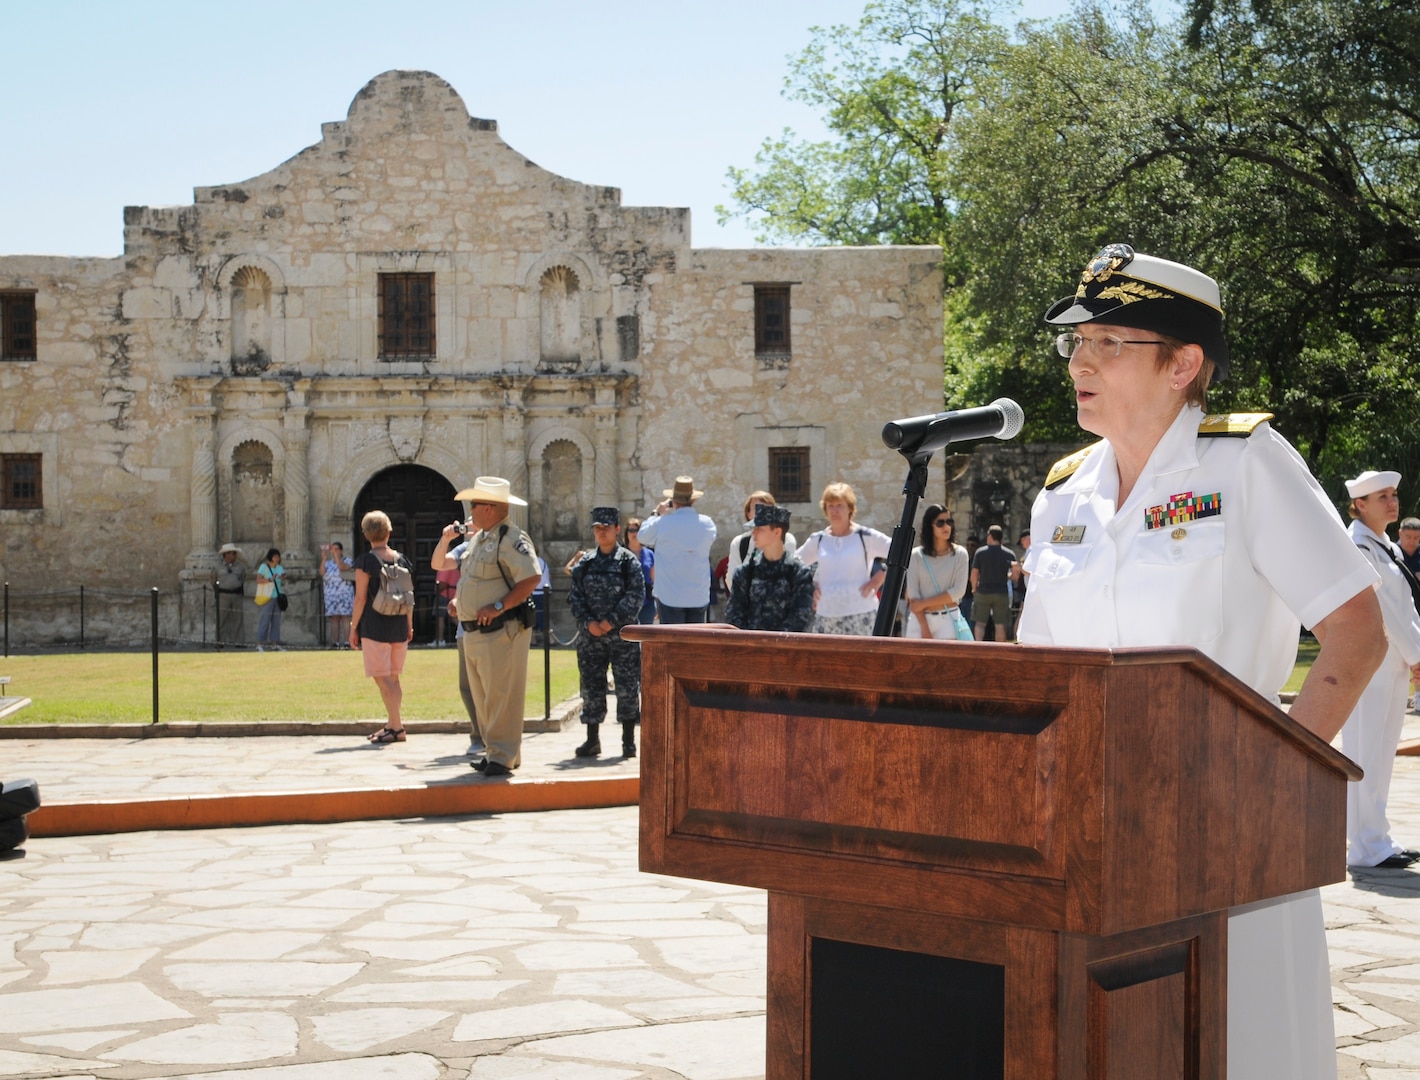 Rear Adm. Rebecca McCormick-Boyle, commander, Navy Medicine Education, Training and Logistics Command, speaks during Navy Day at the Alamo as part of Fiesta in downtown San Antonio. McCormick-Boyle attended as the host and senior Navy officer in the San Antonio area and was joined by several other area commands.